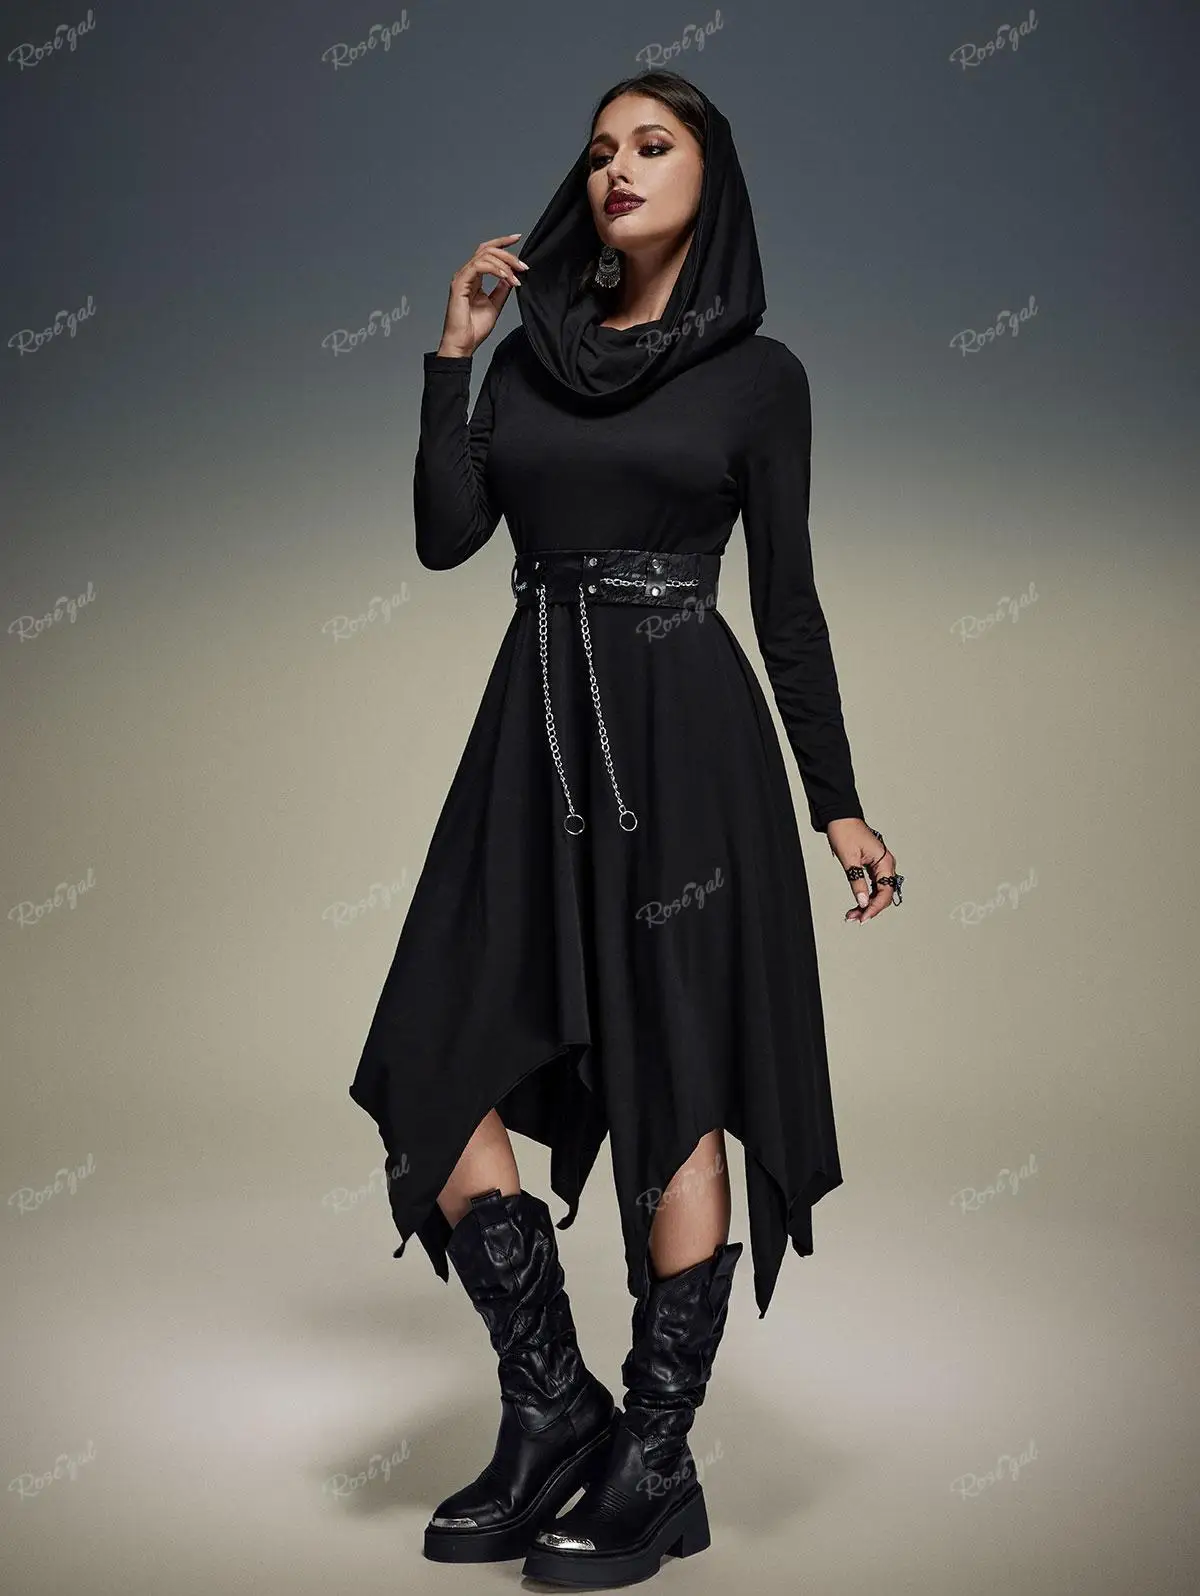 

ROSEGAL Plus Size Gothic Asymmetric Hooded Dresses With Floral Lace Chain Belt Women Black Handkerchief Ruched Dress Vestidos